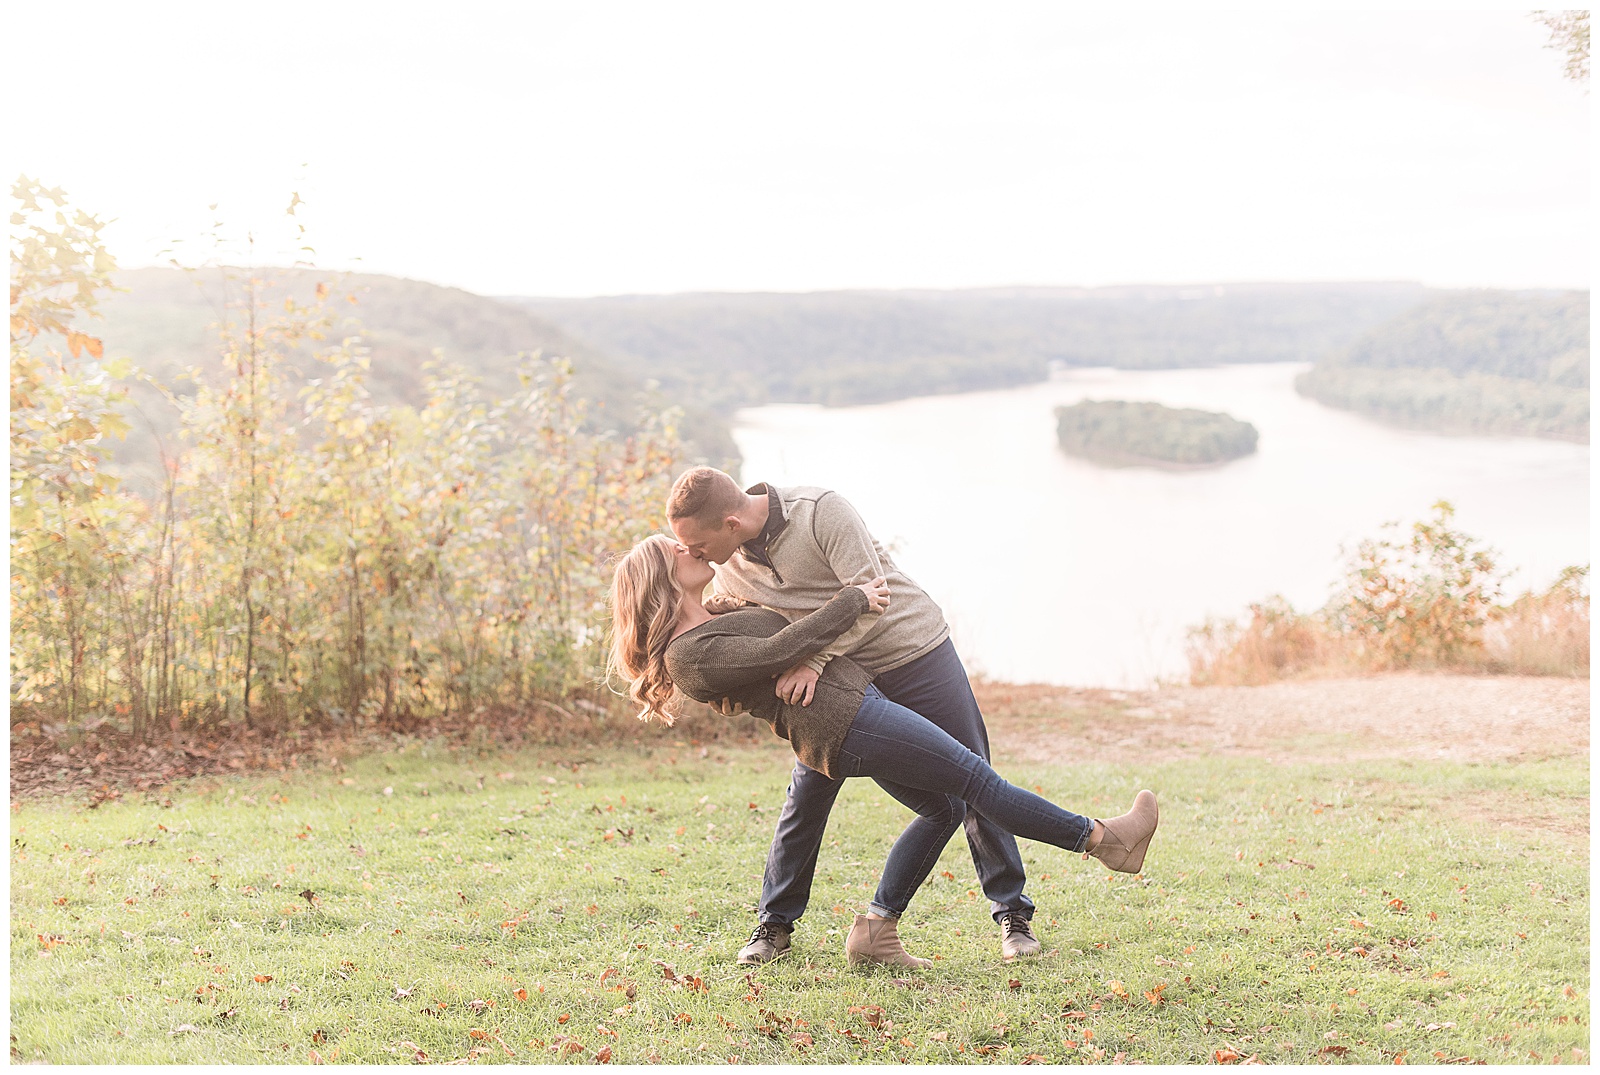 guy dipping girl back and kissing her in grass atop pinnacle overlook with susquehanna river behind them on fall day